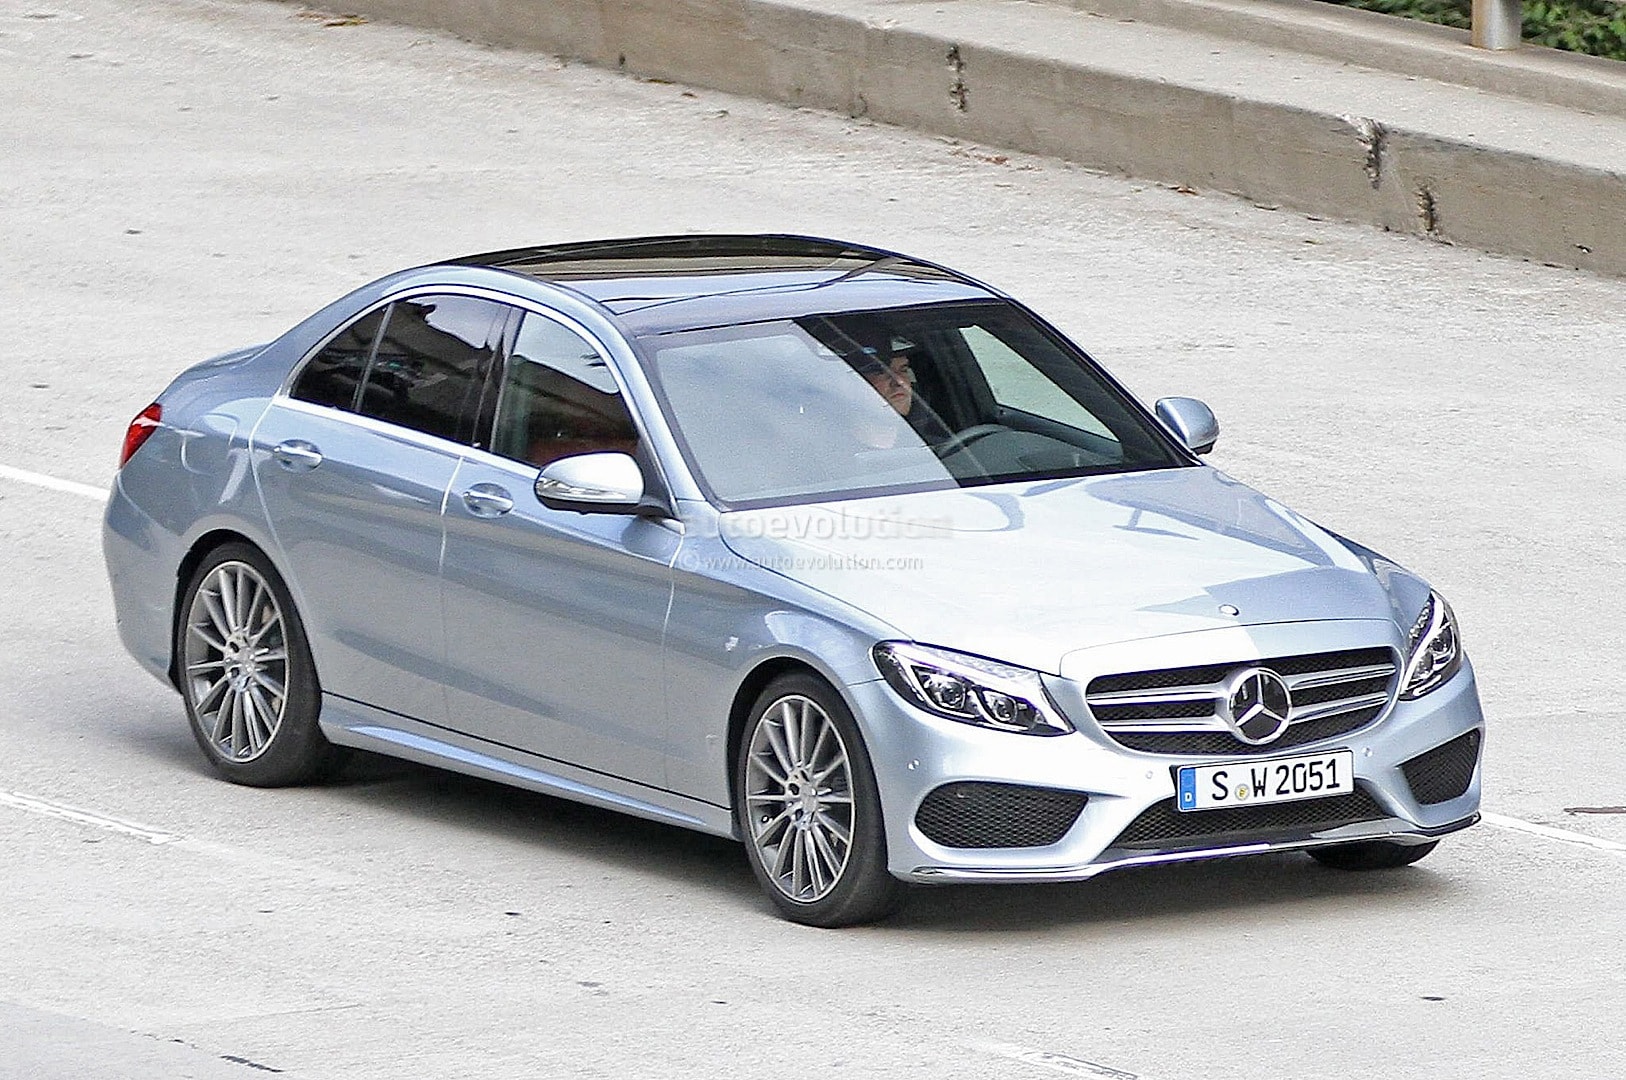 Mercedes-Benz C350 Plug-In Hybrid to Use Less Fuel Than a Toyota